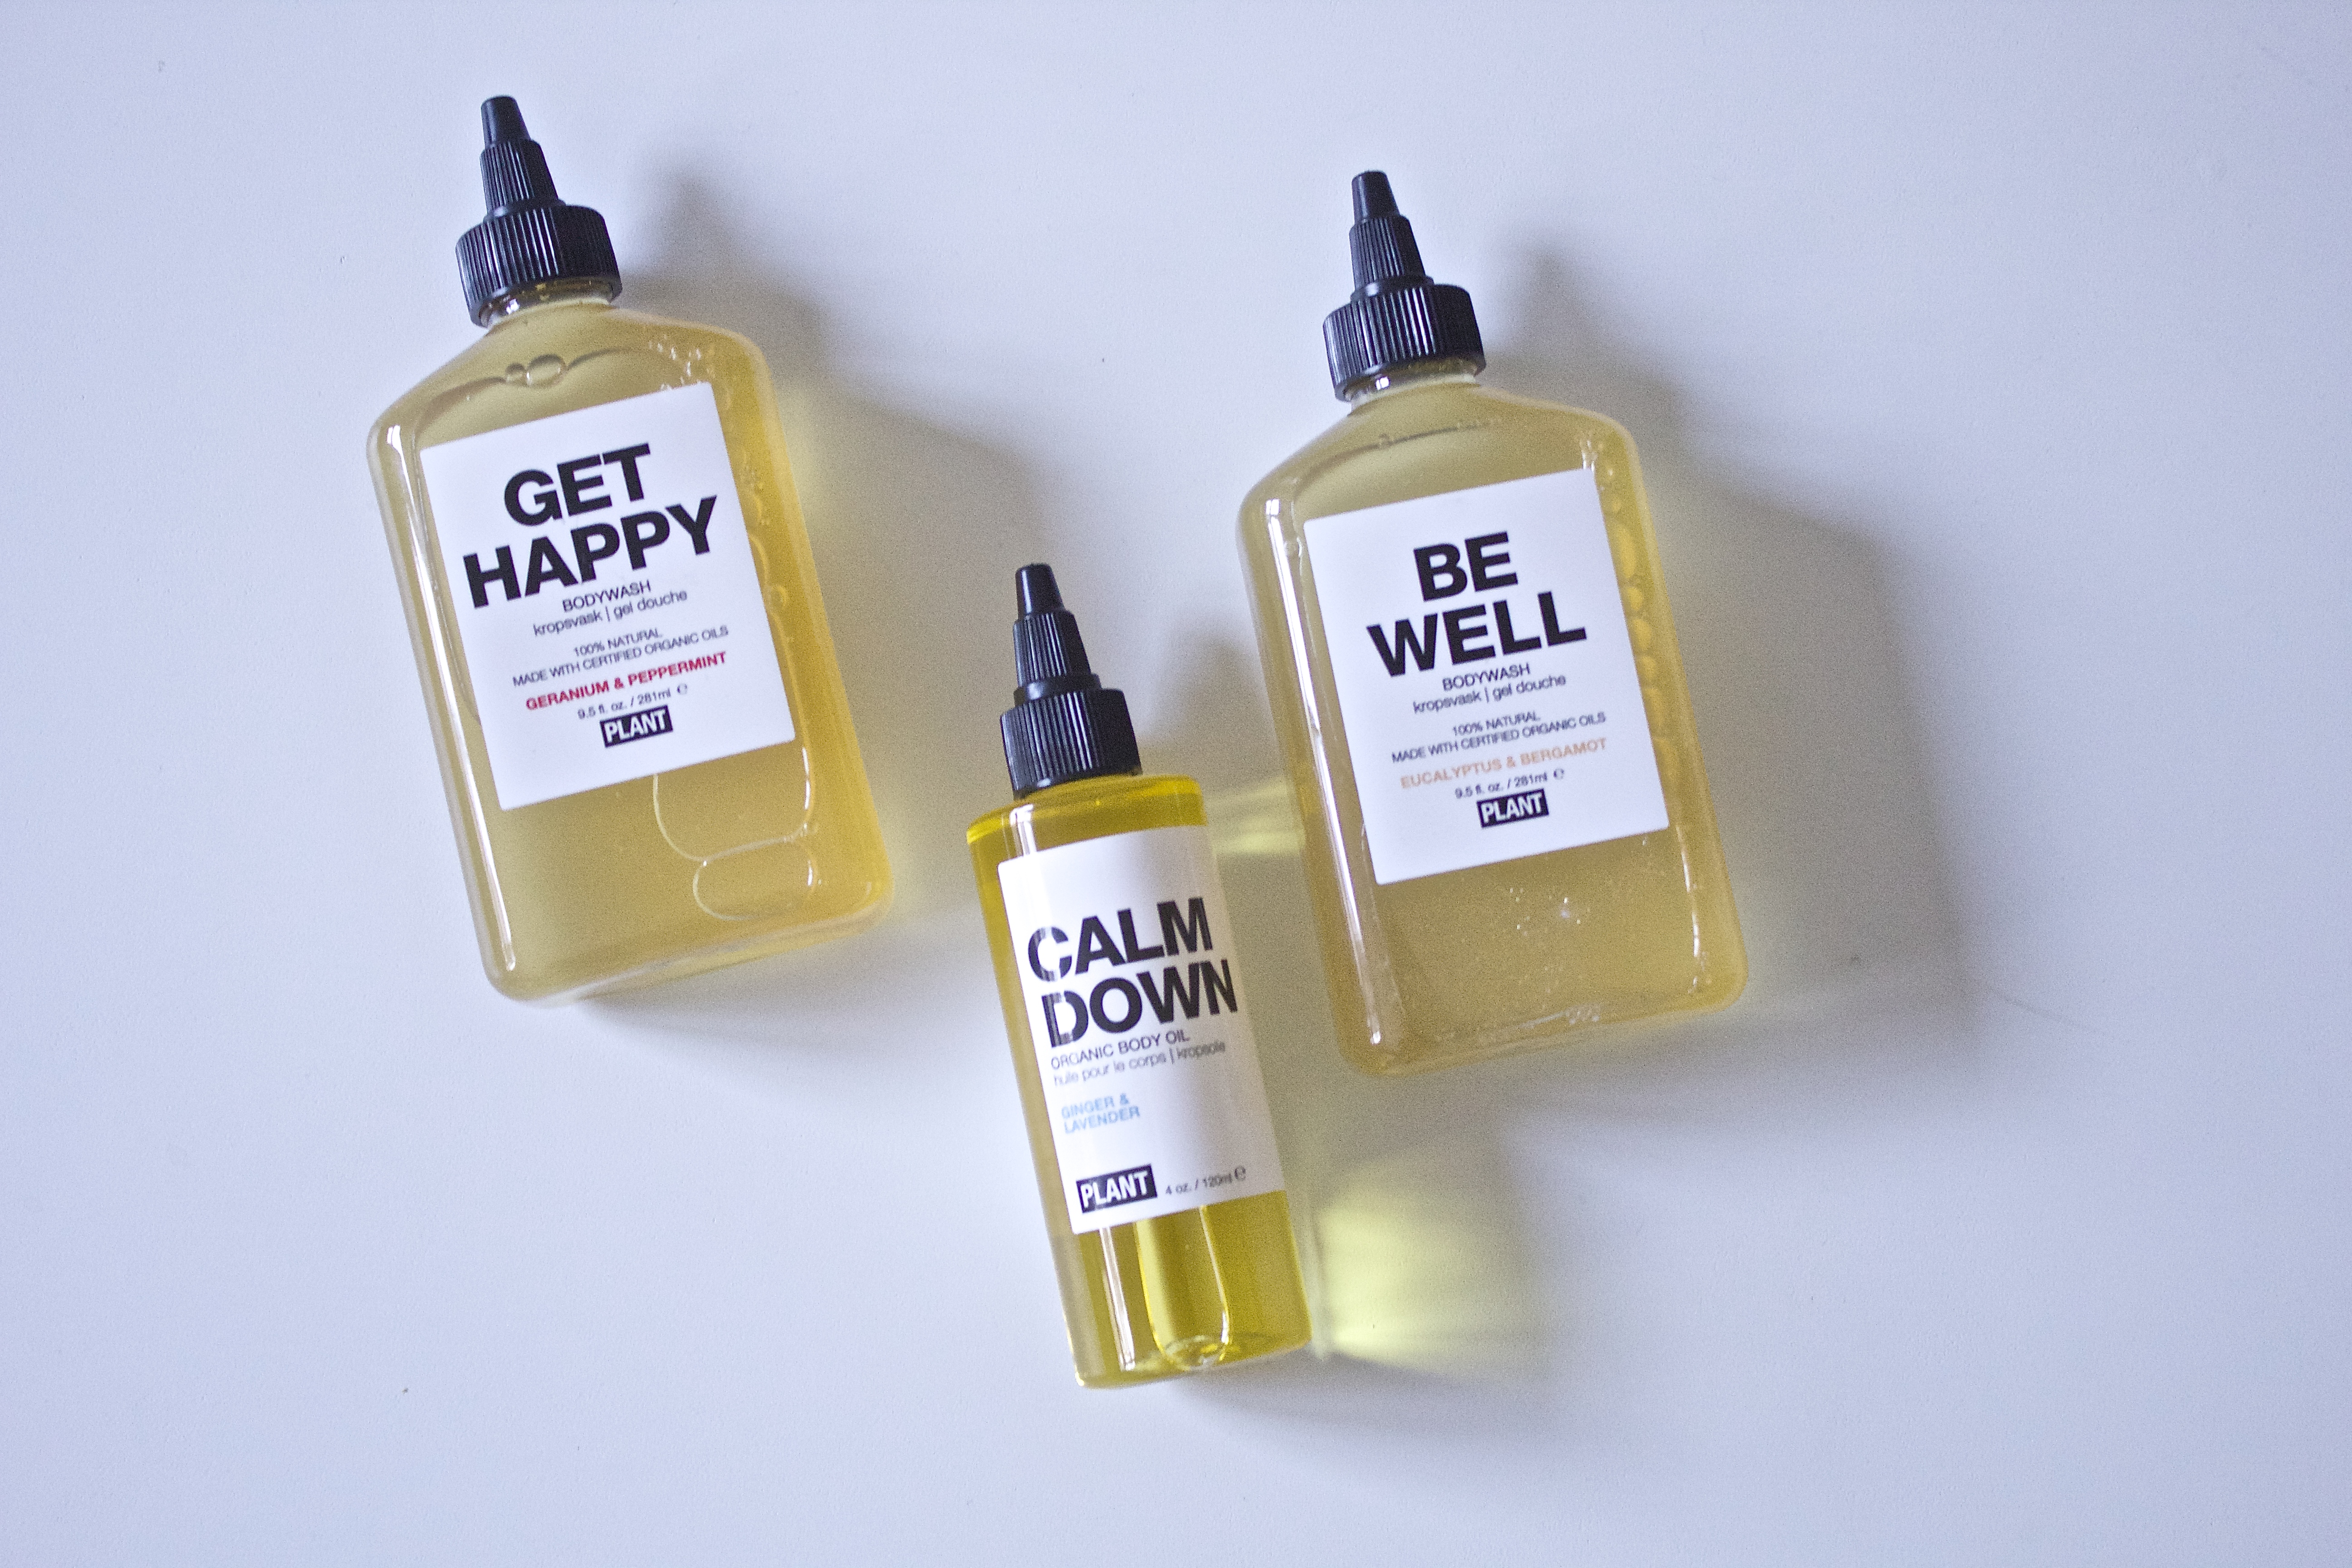 PLANT Apothecary: Products With A Conscience